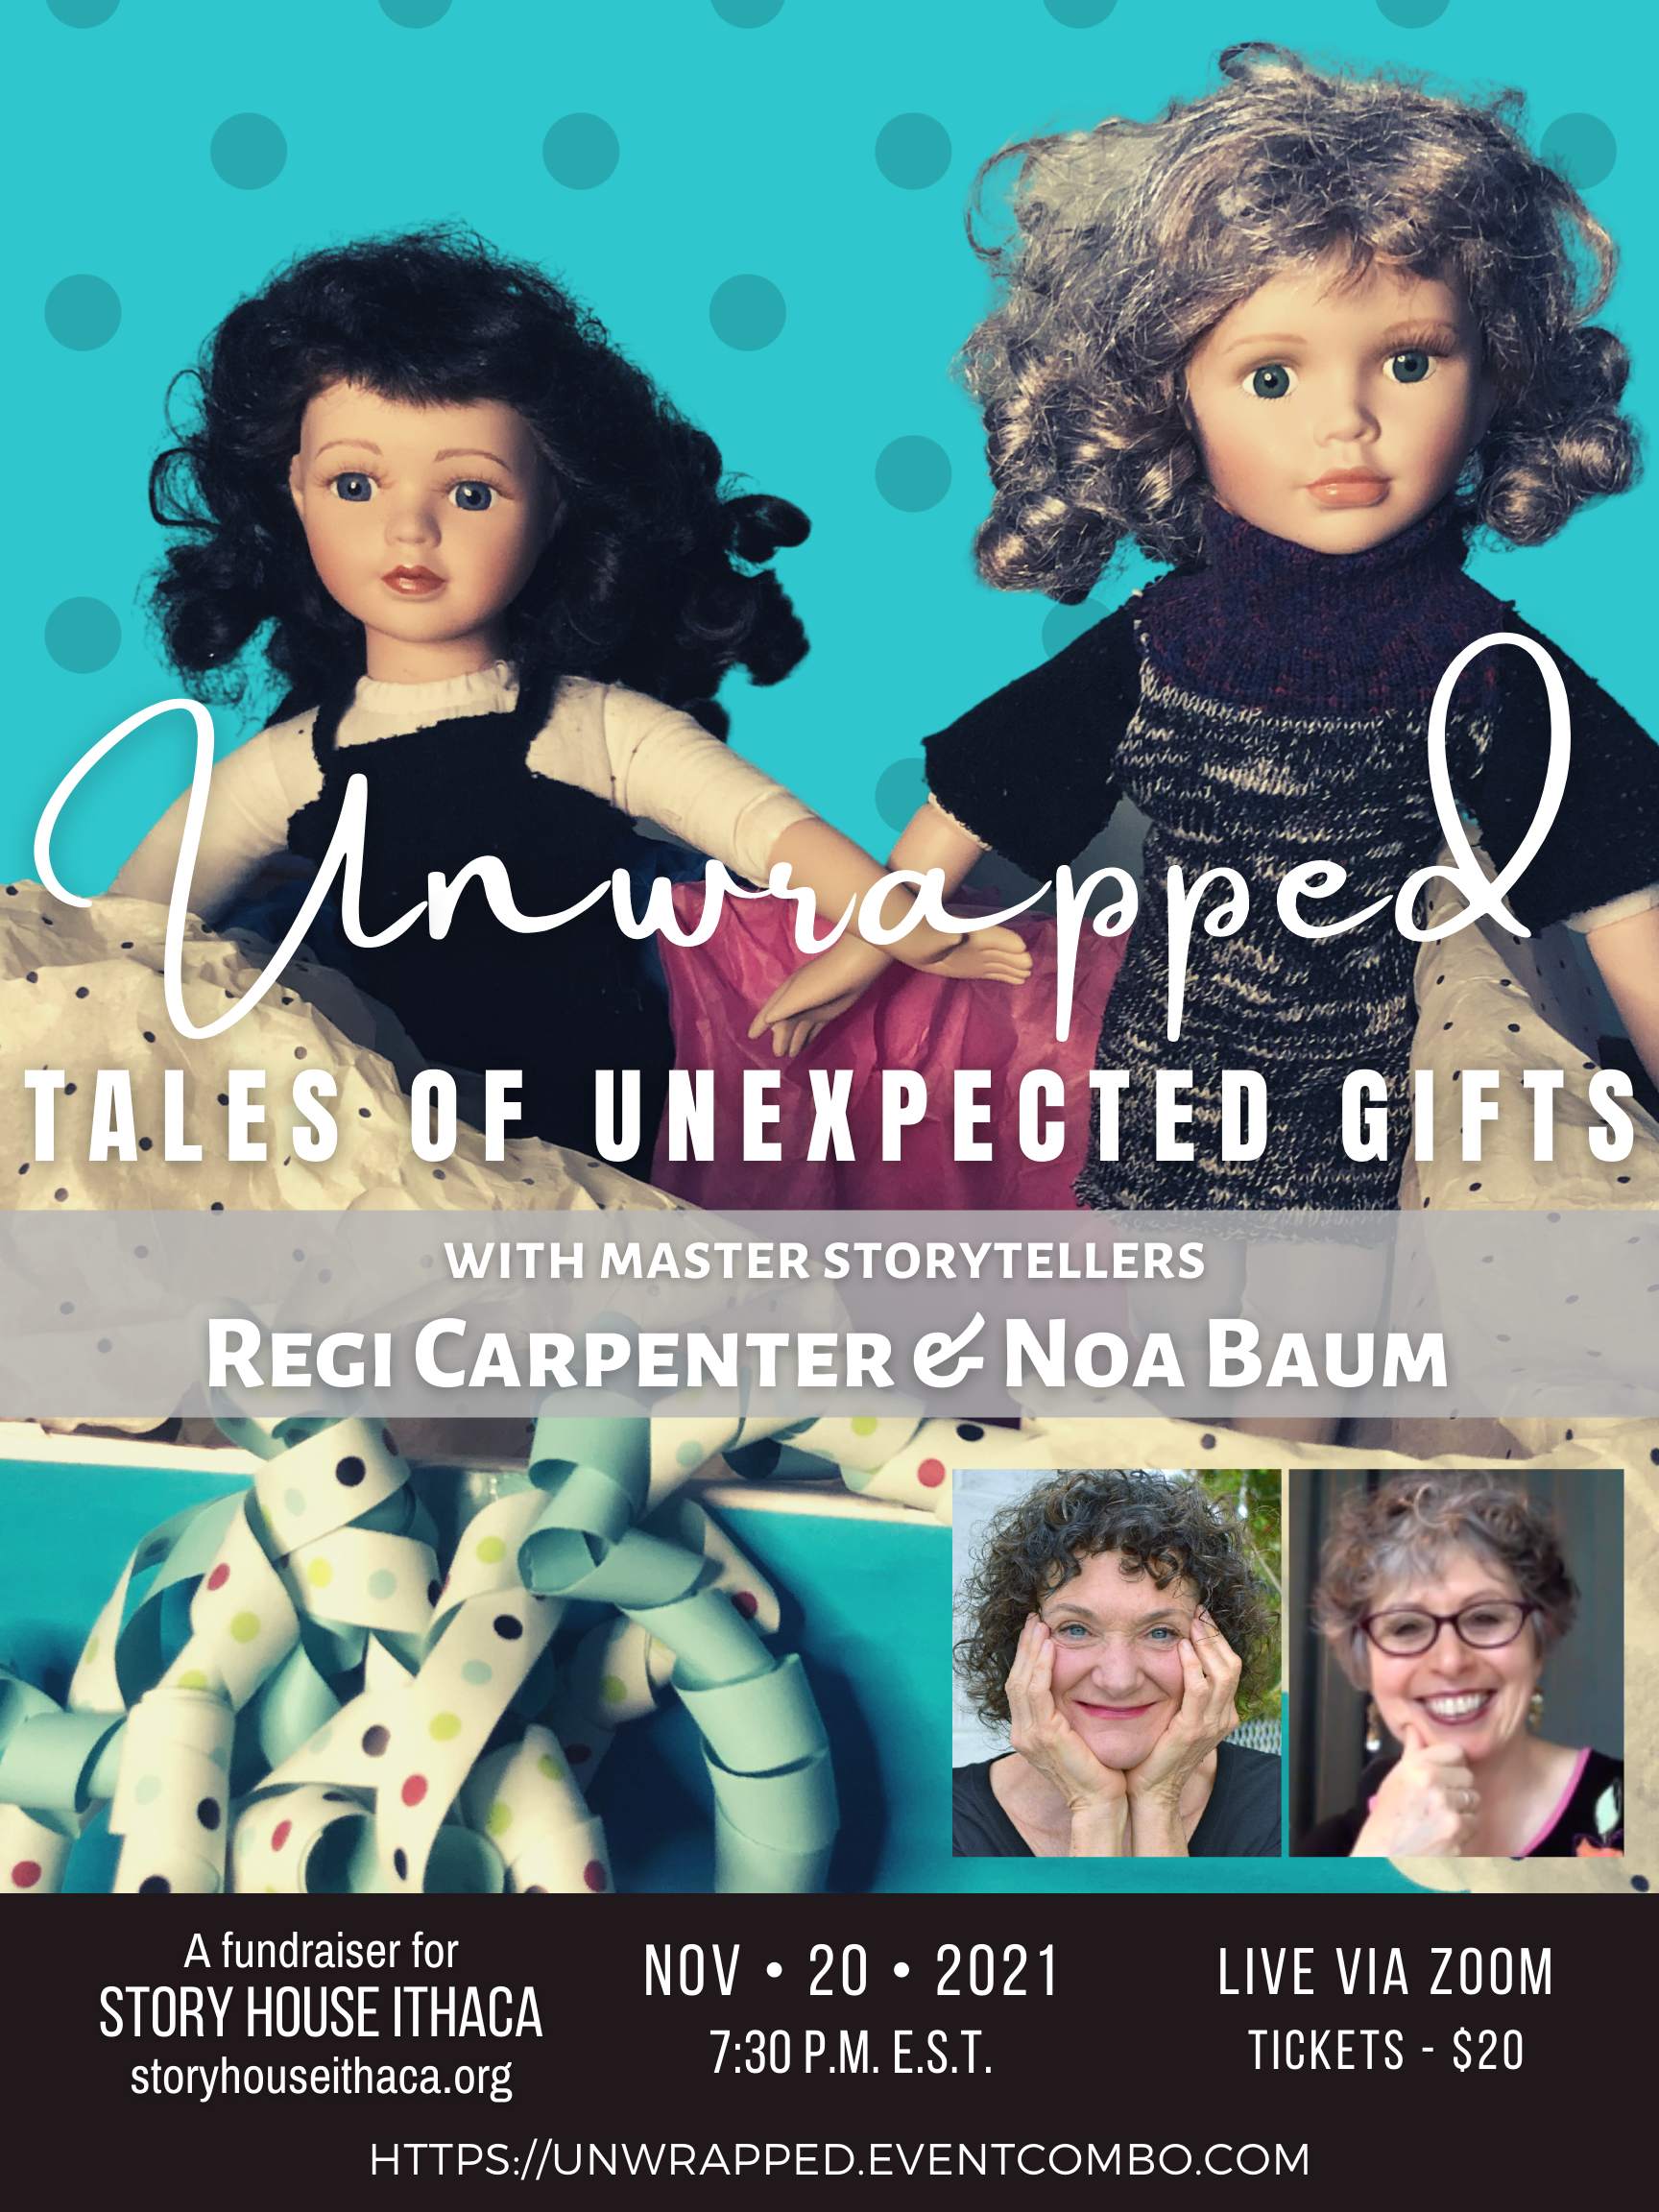 Unwrapped - Tales of Unexpected Gifts
with Noa Baum and Regi Carpenter